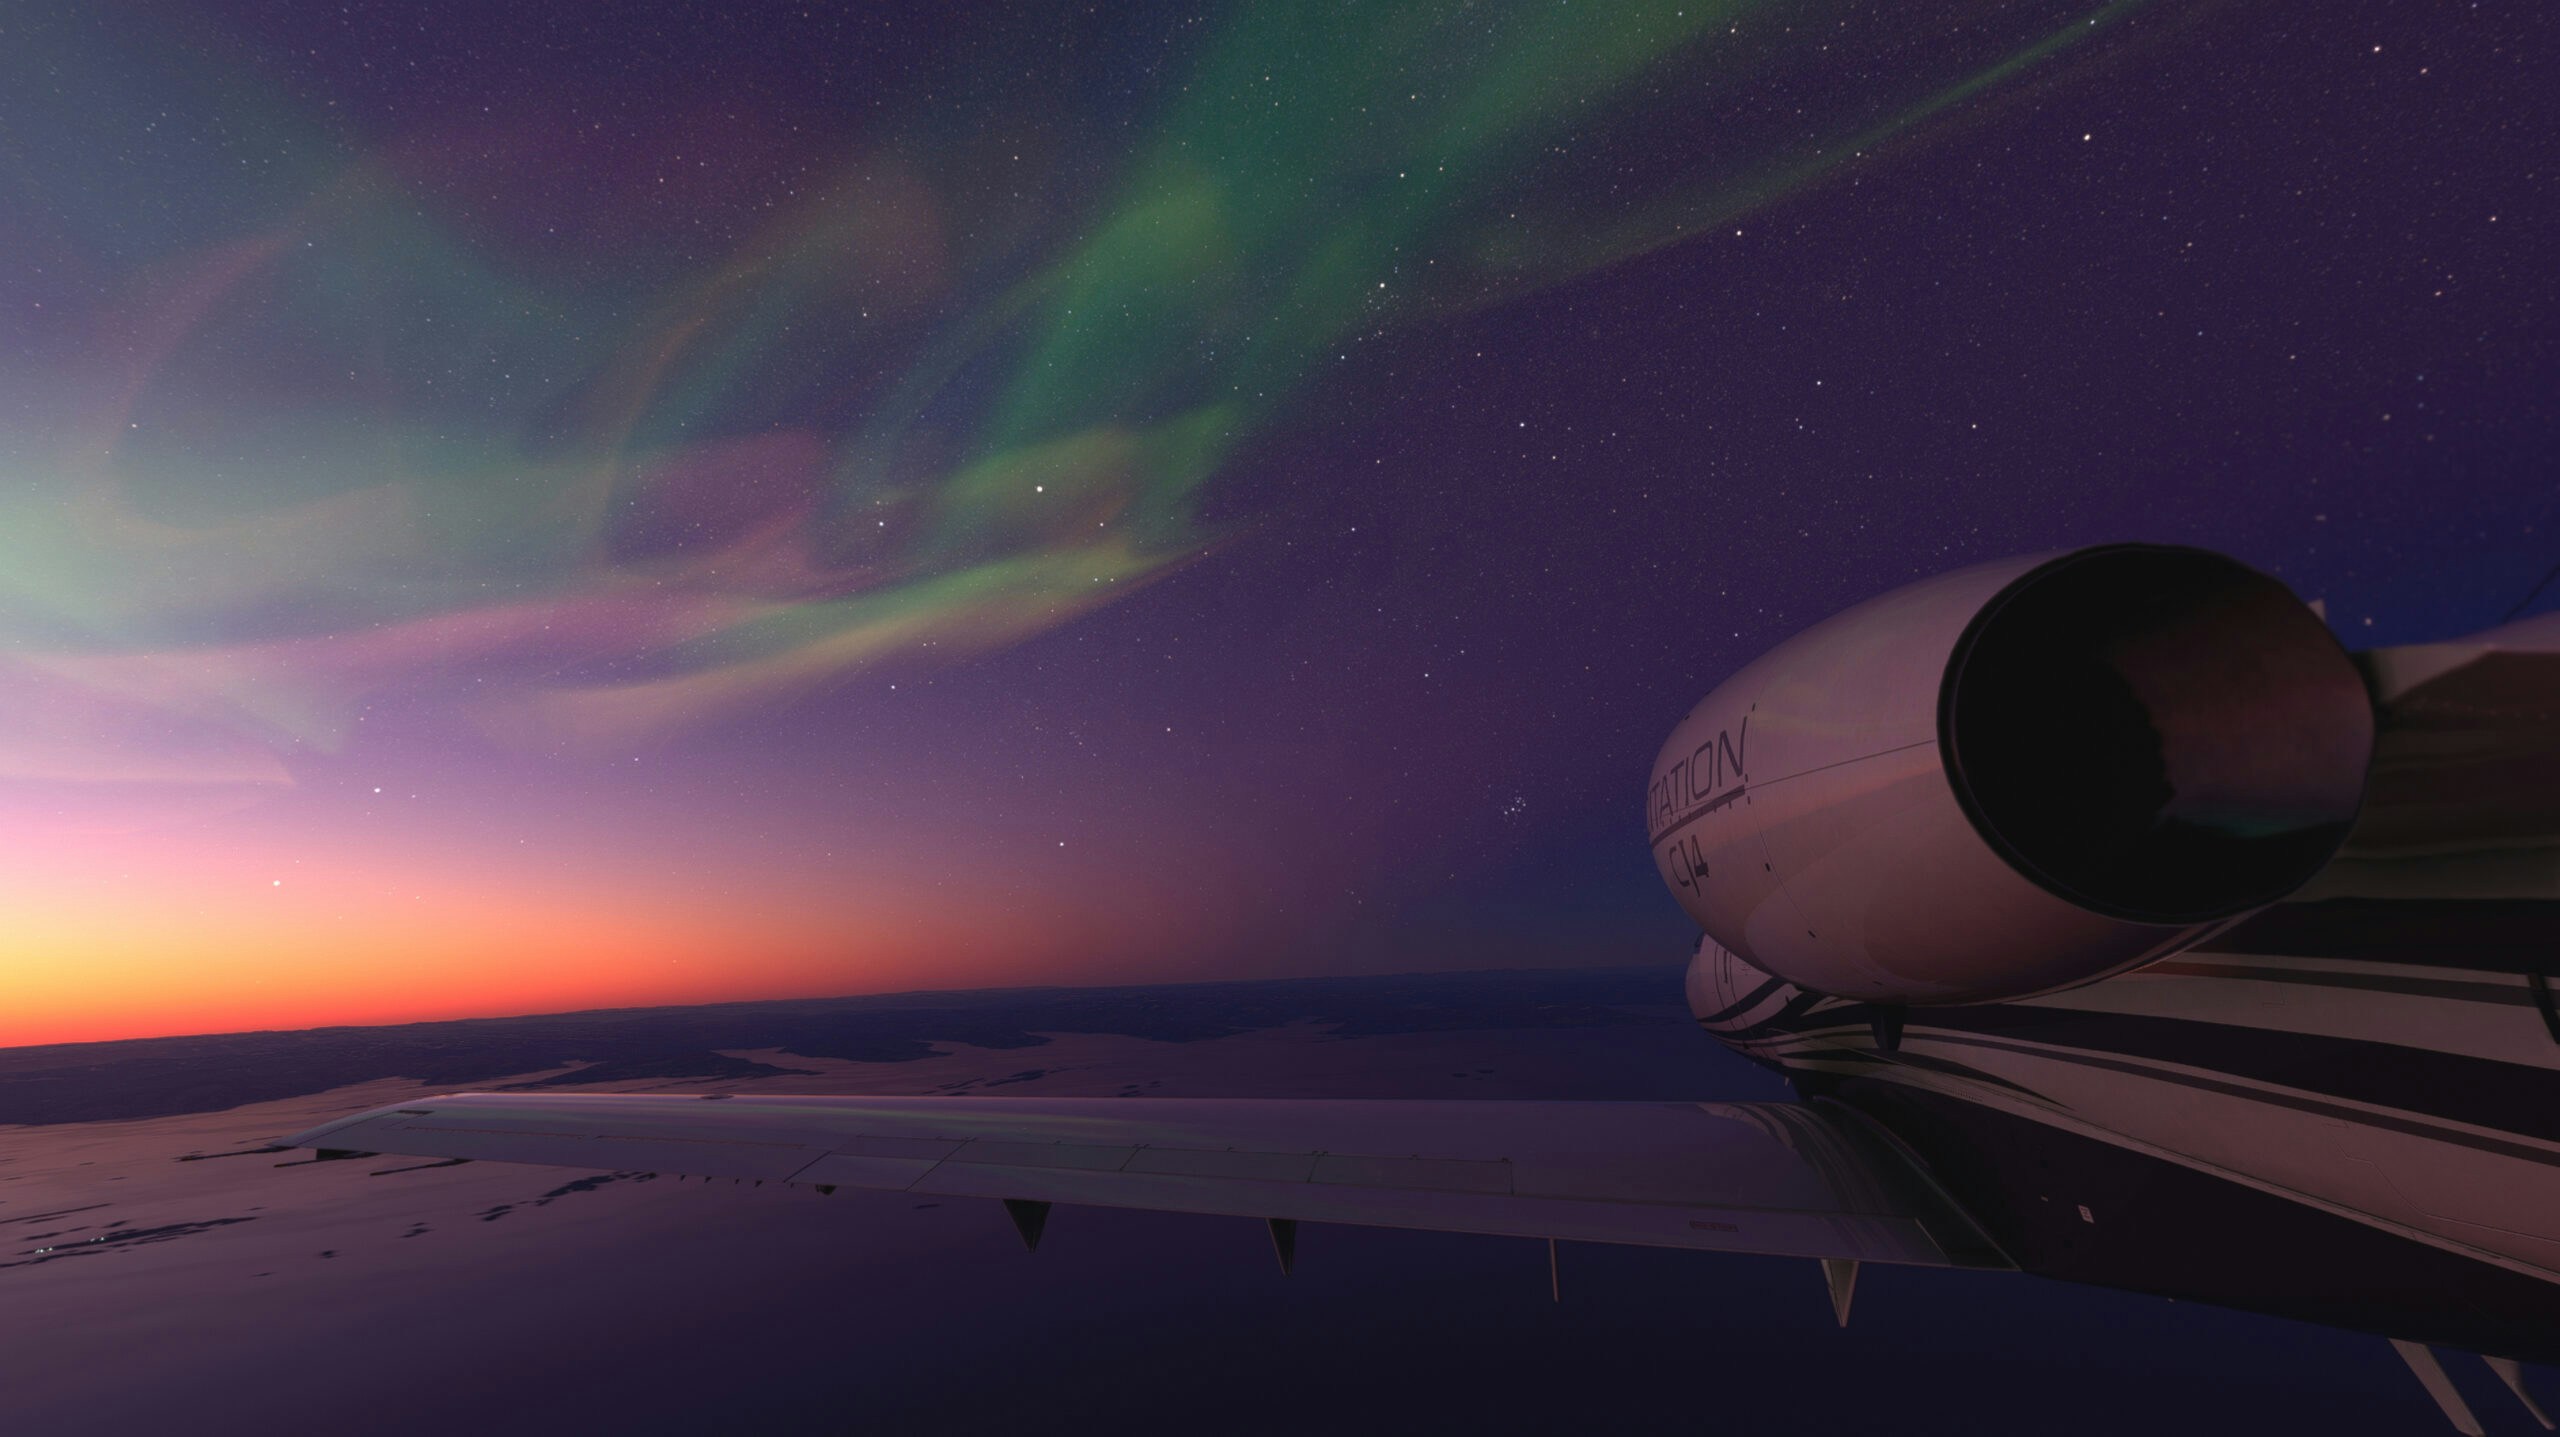 Aurora Borealis: Northern Lights Released for MSFS